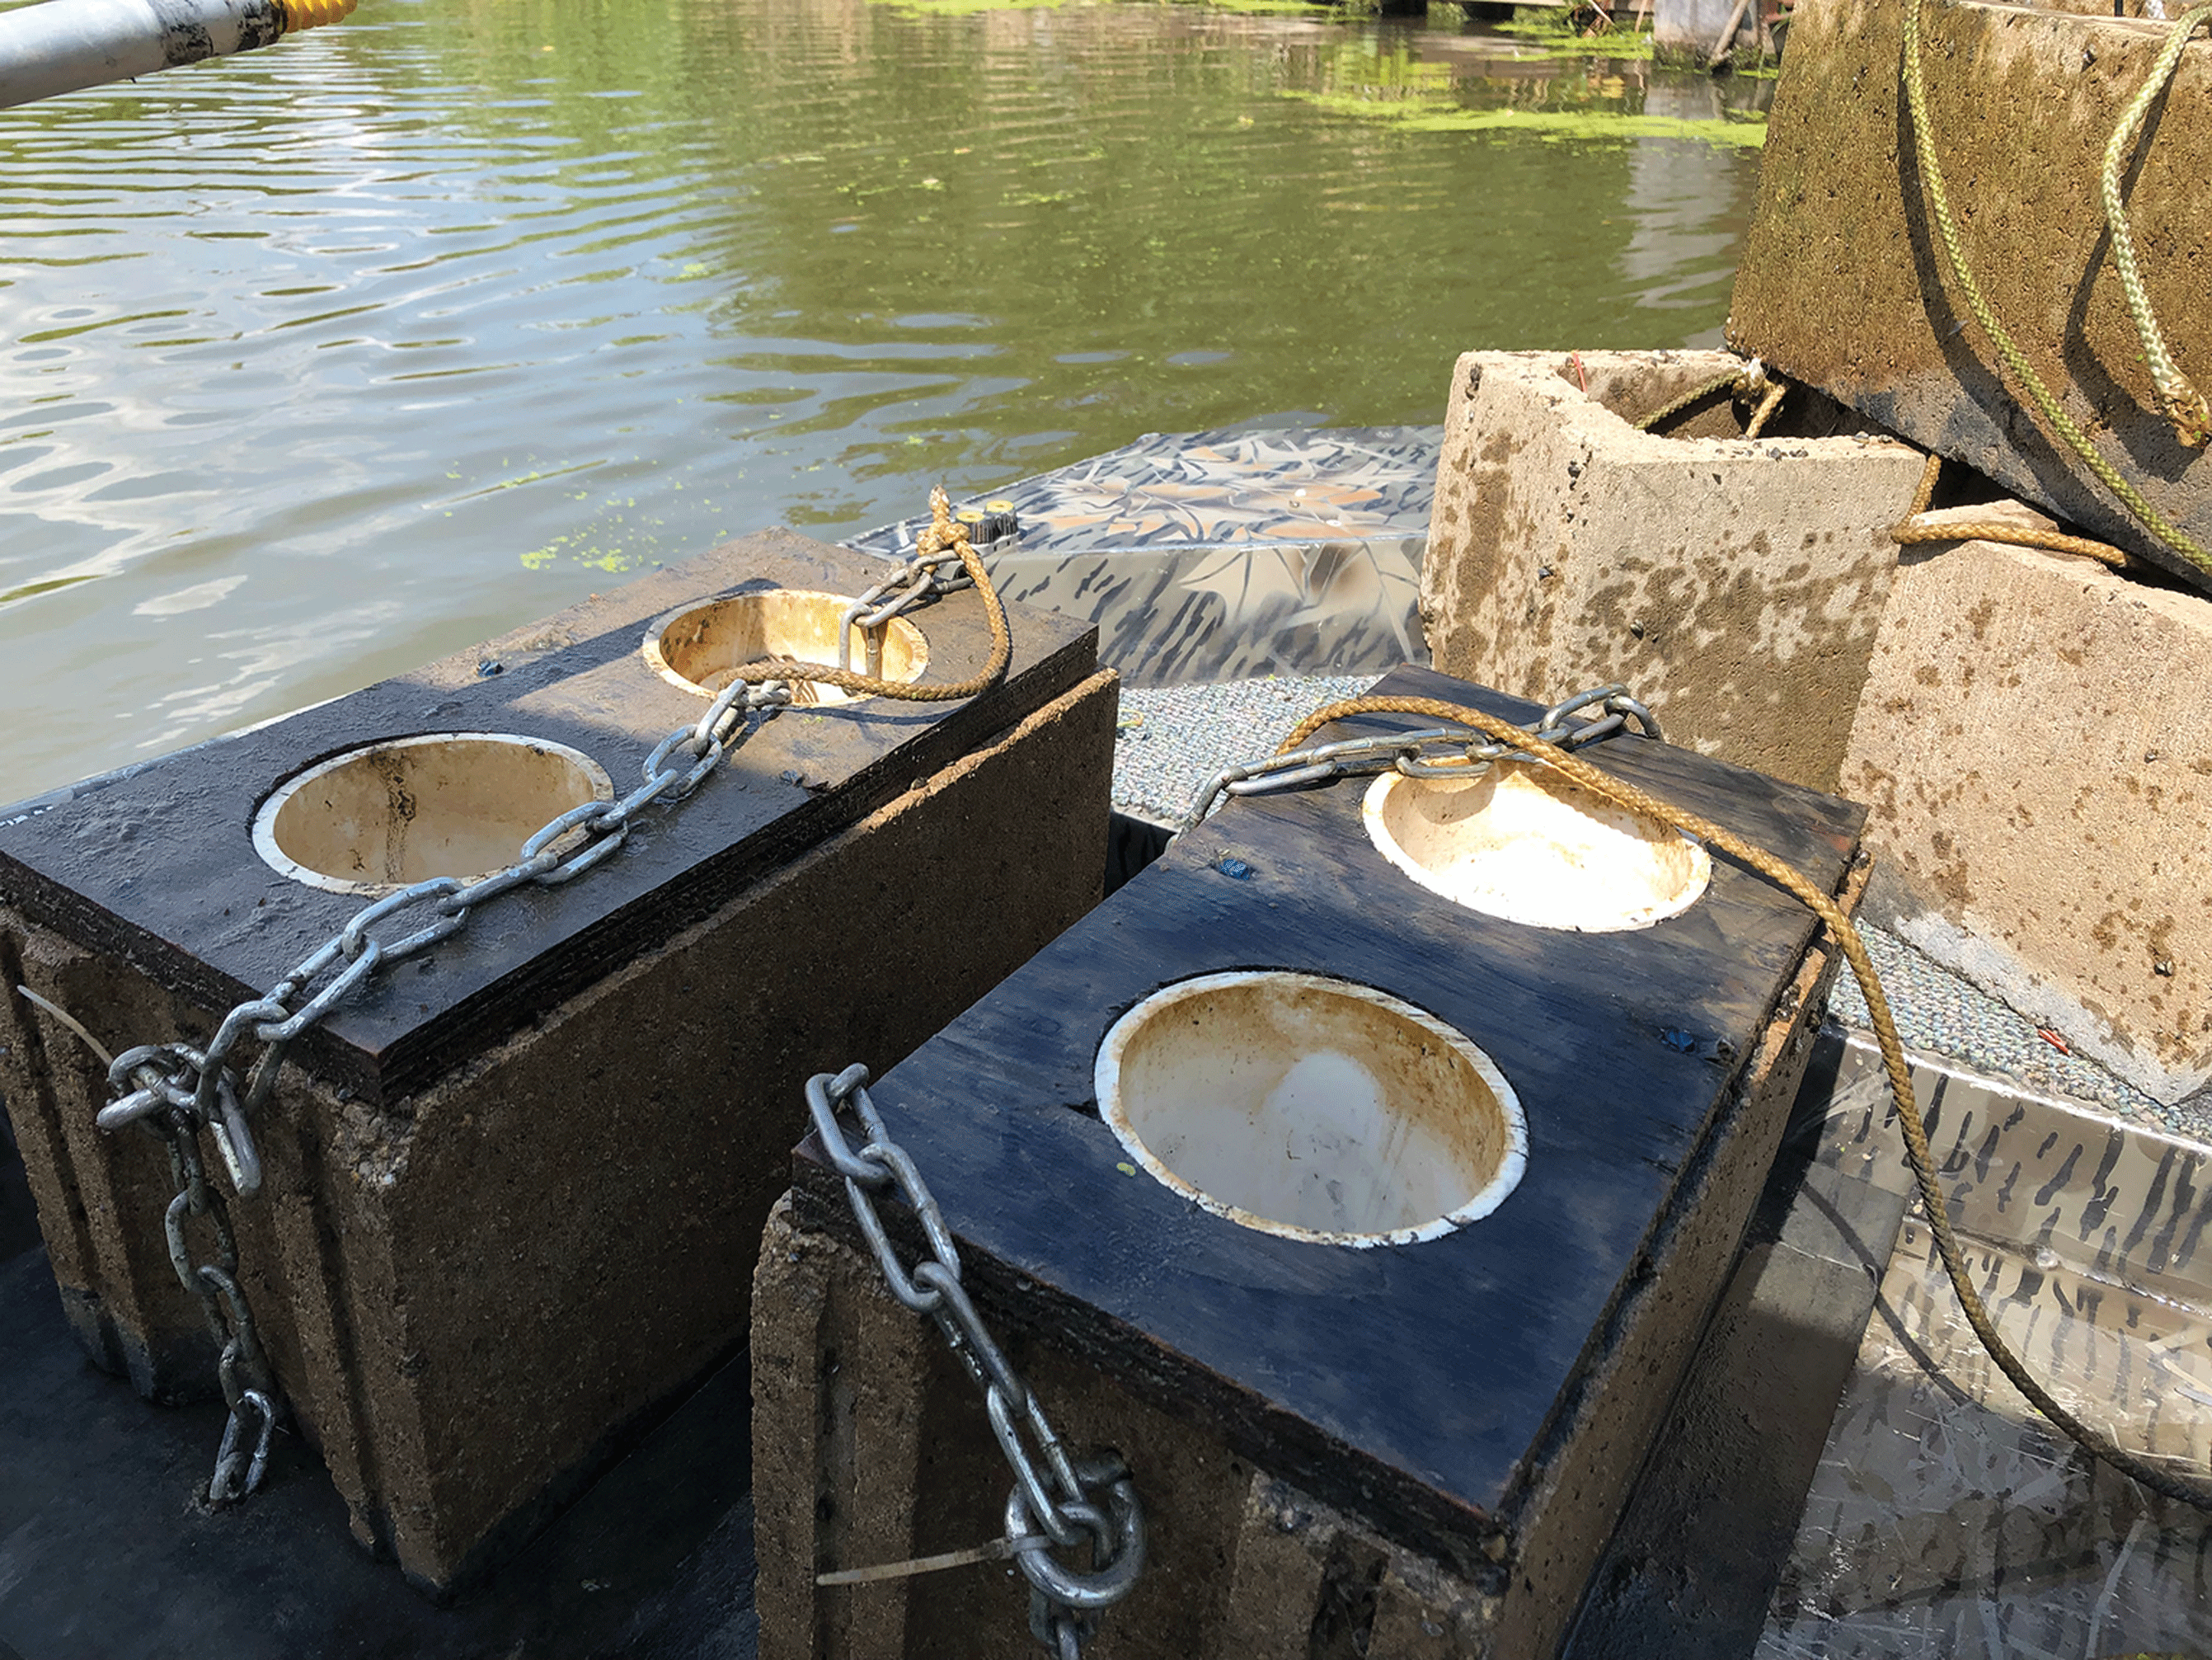 Two samplers sitting on a dock over water. The samplers are in large cement blocks
                        with chains attached.